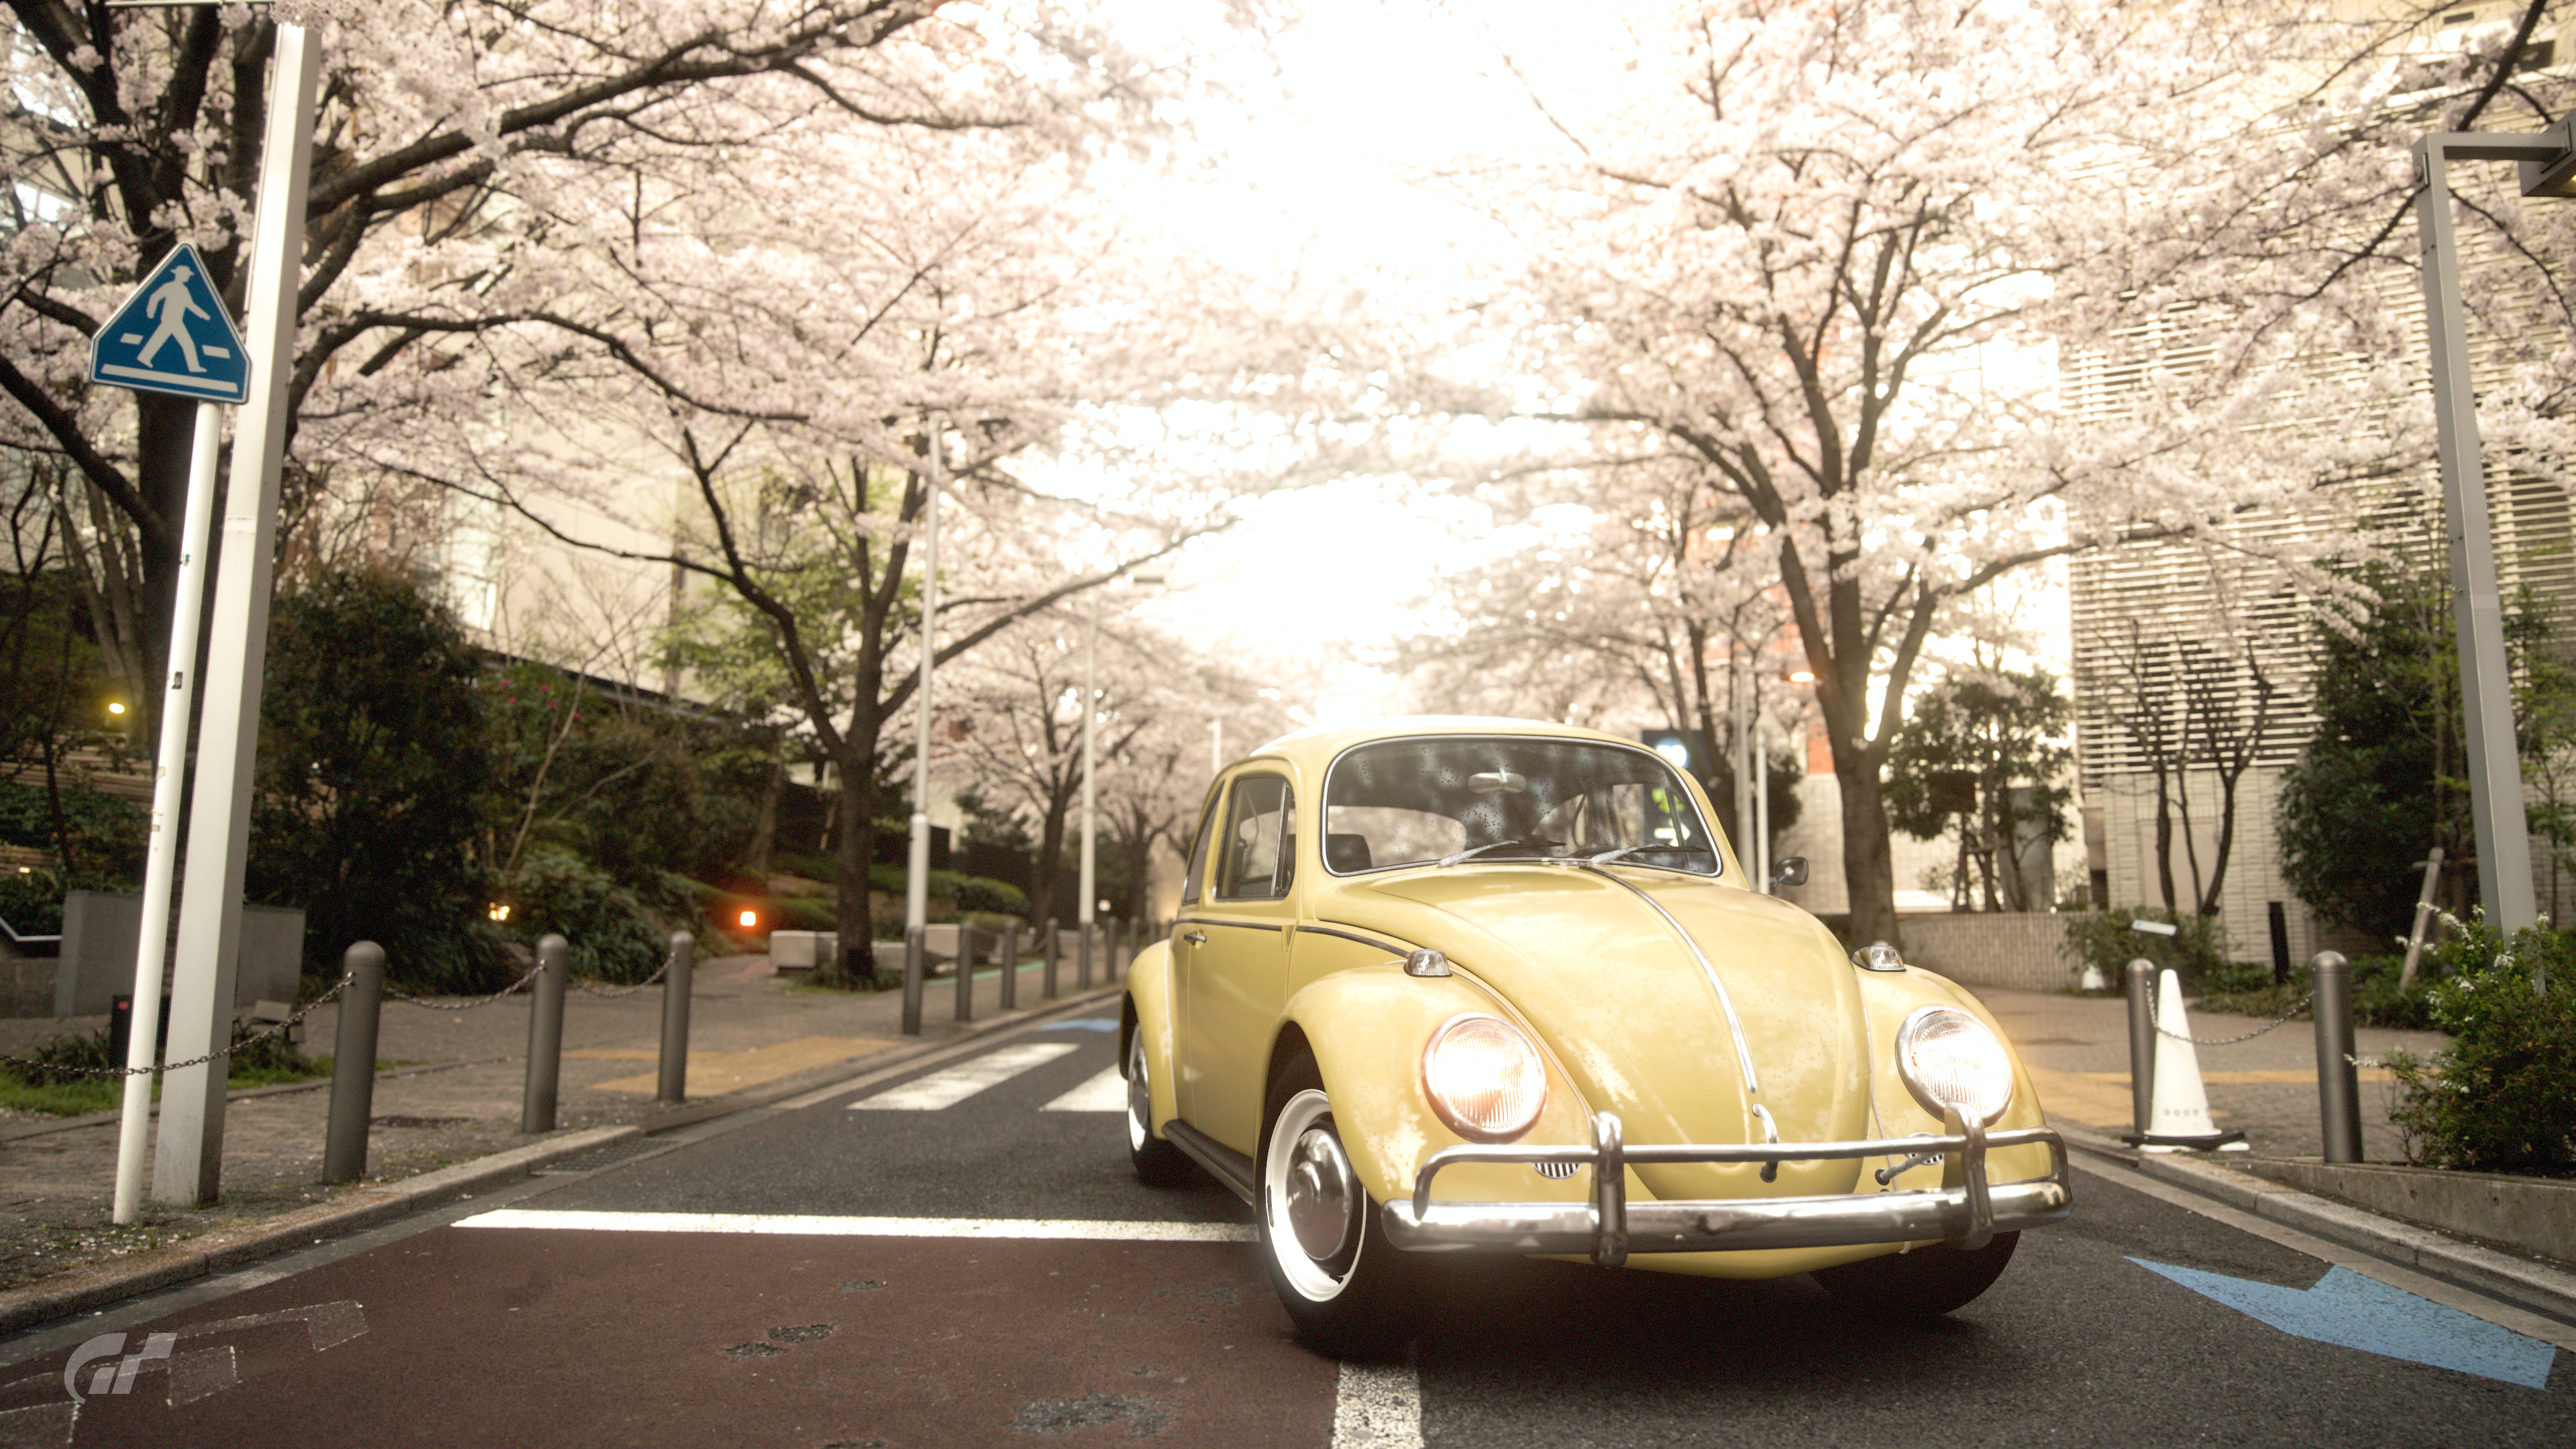 General 3840x2160 nature car vehicle video games Gran Turismo 7 Volkswagen Beetle cherry blossom Japan street frontal view trees road sign